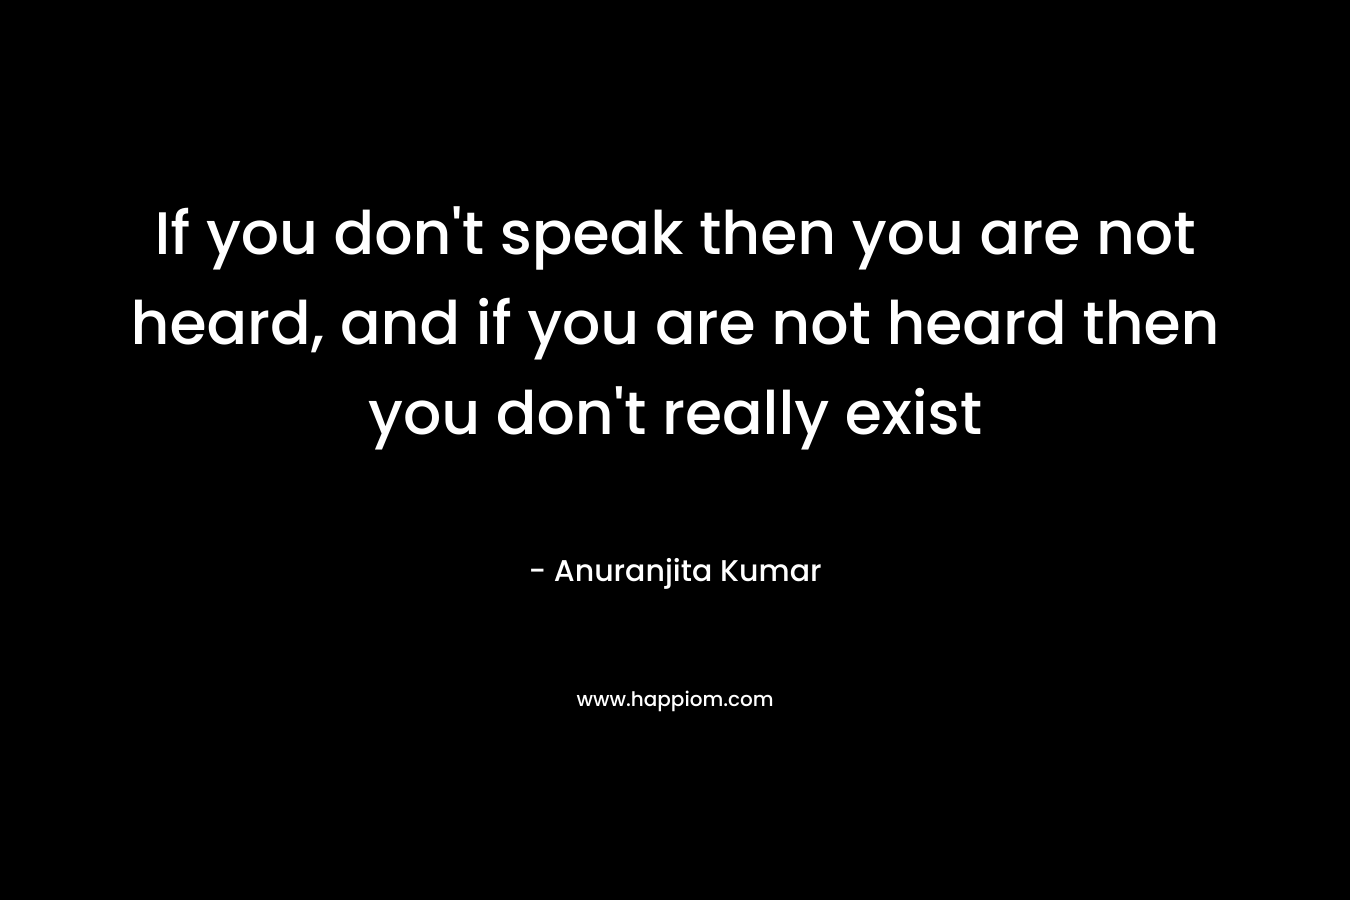 If you don't speak then you are not heard, and if you are not heard then you don't really exist